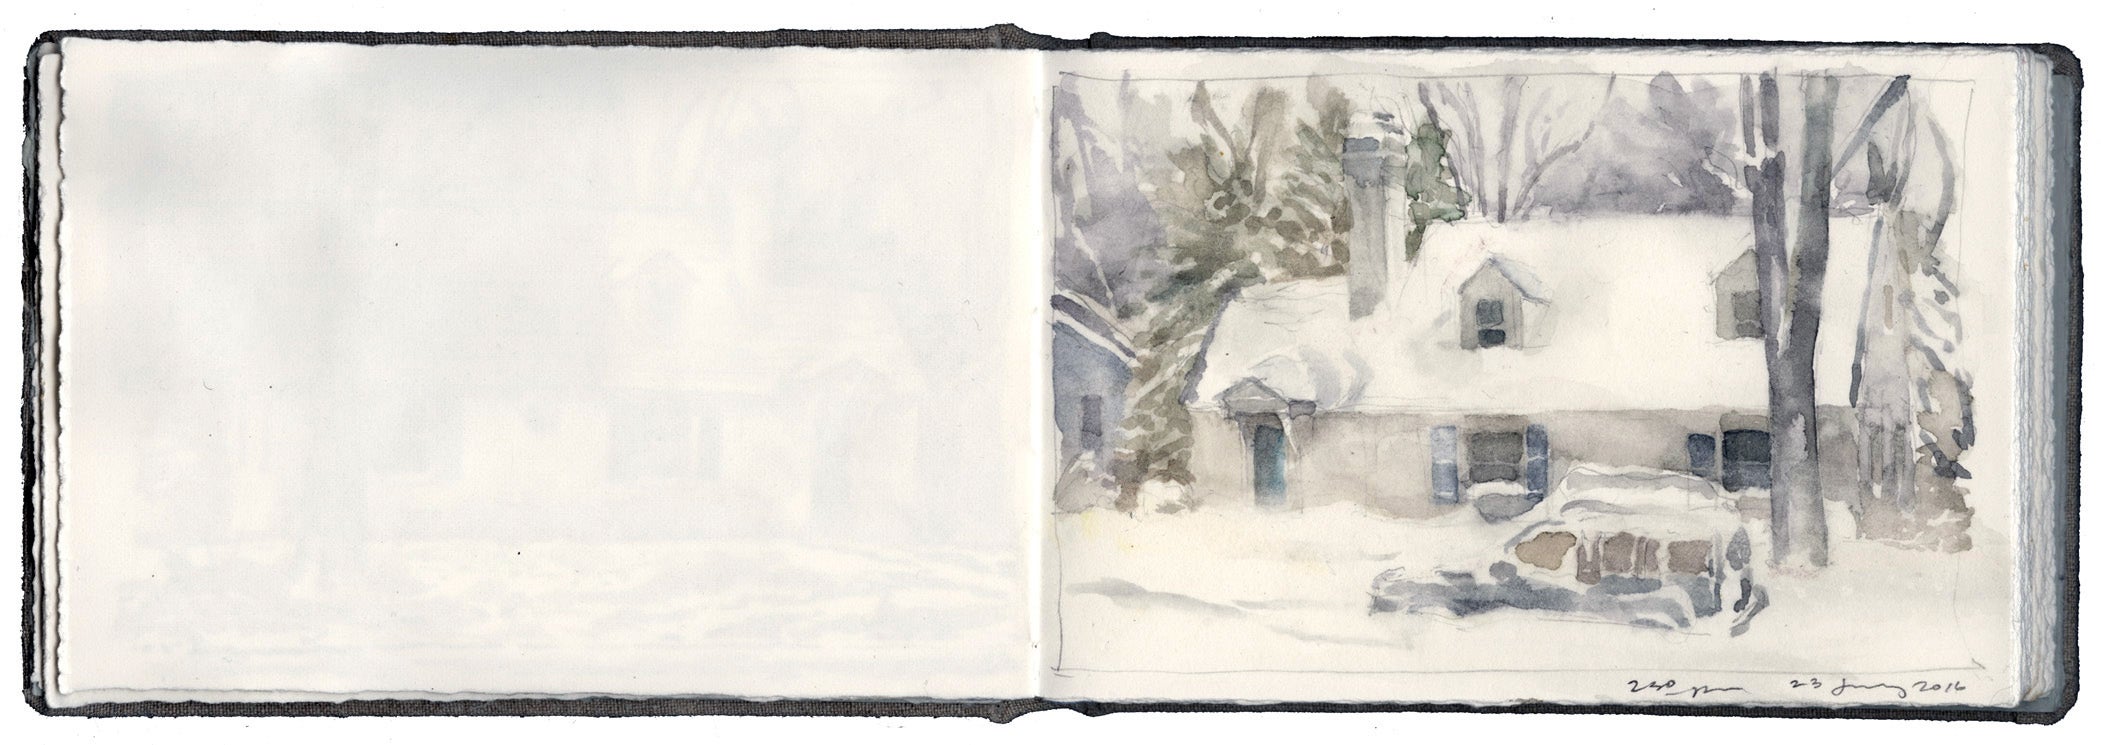 Study of Blowing Snow image